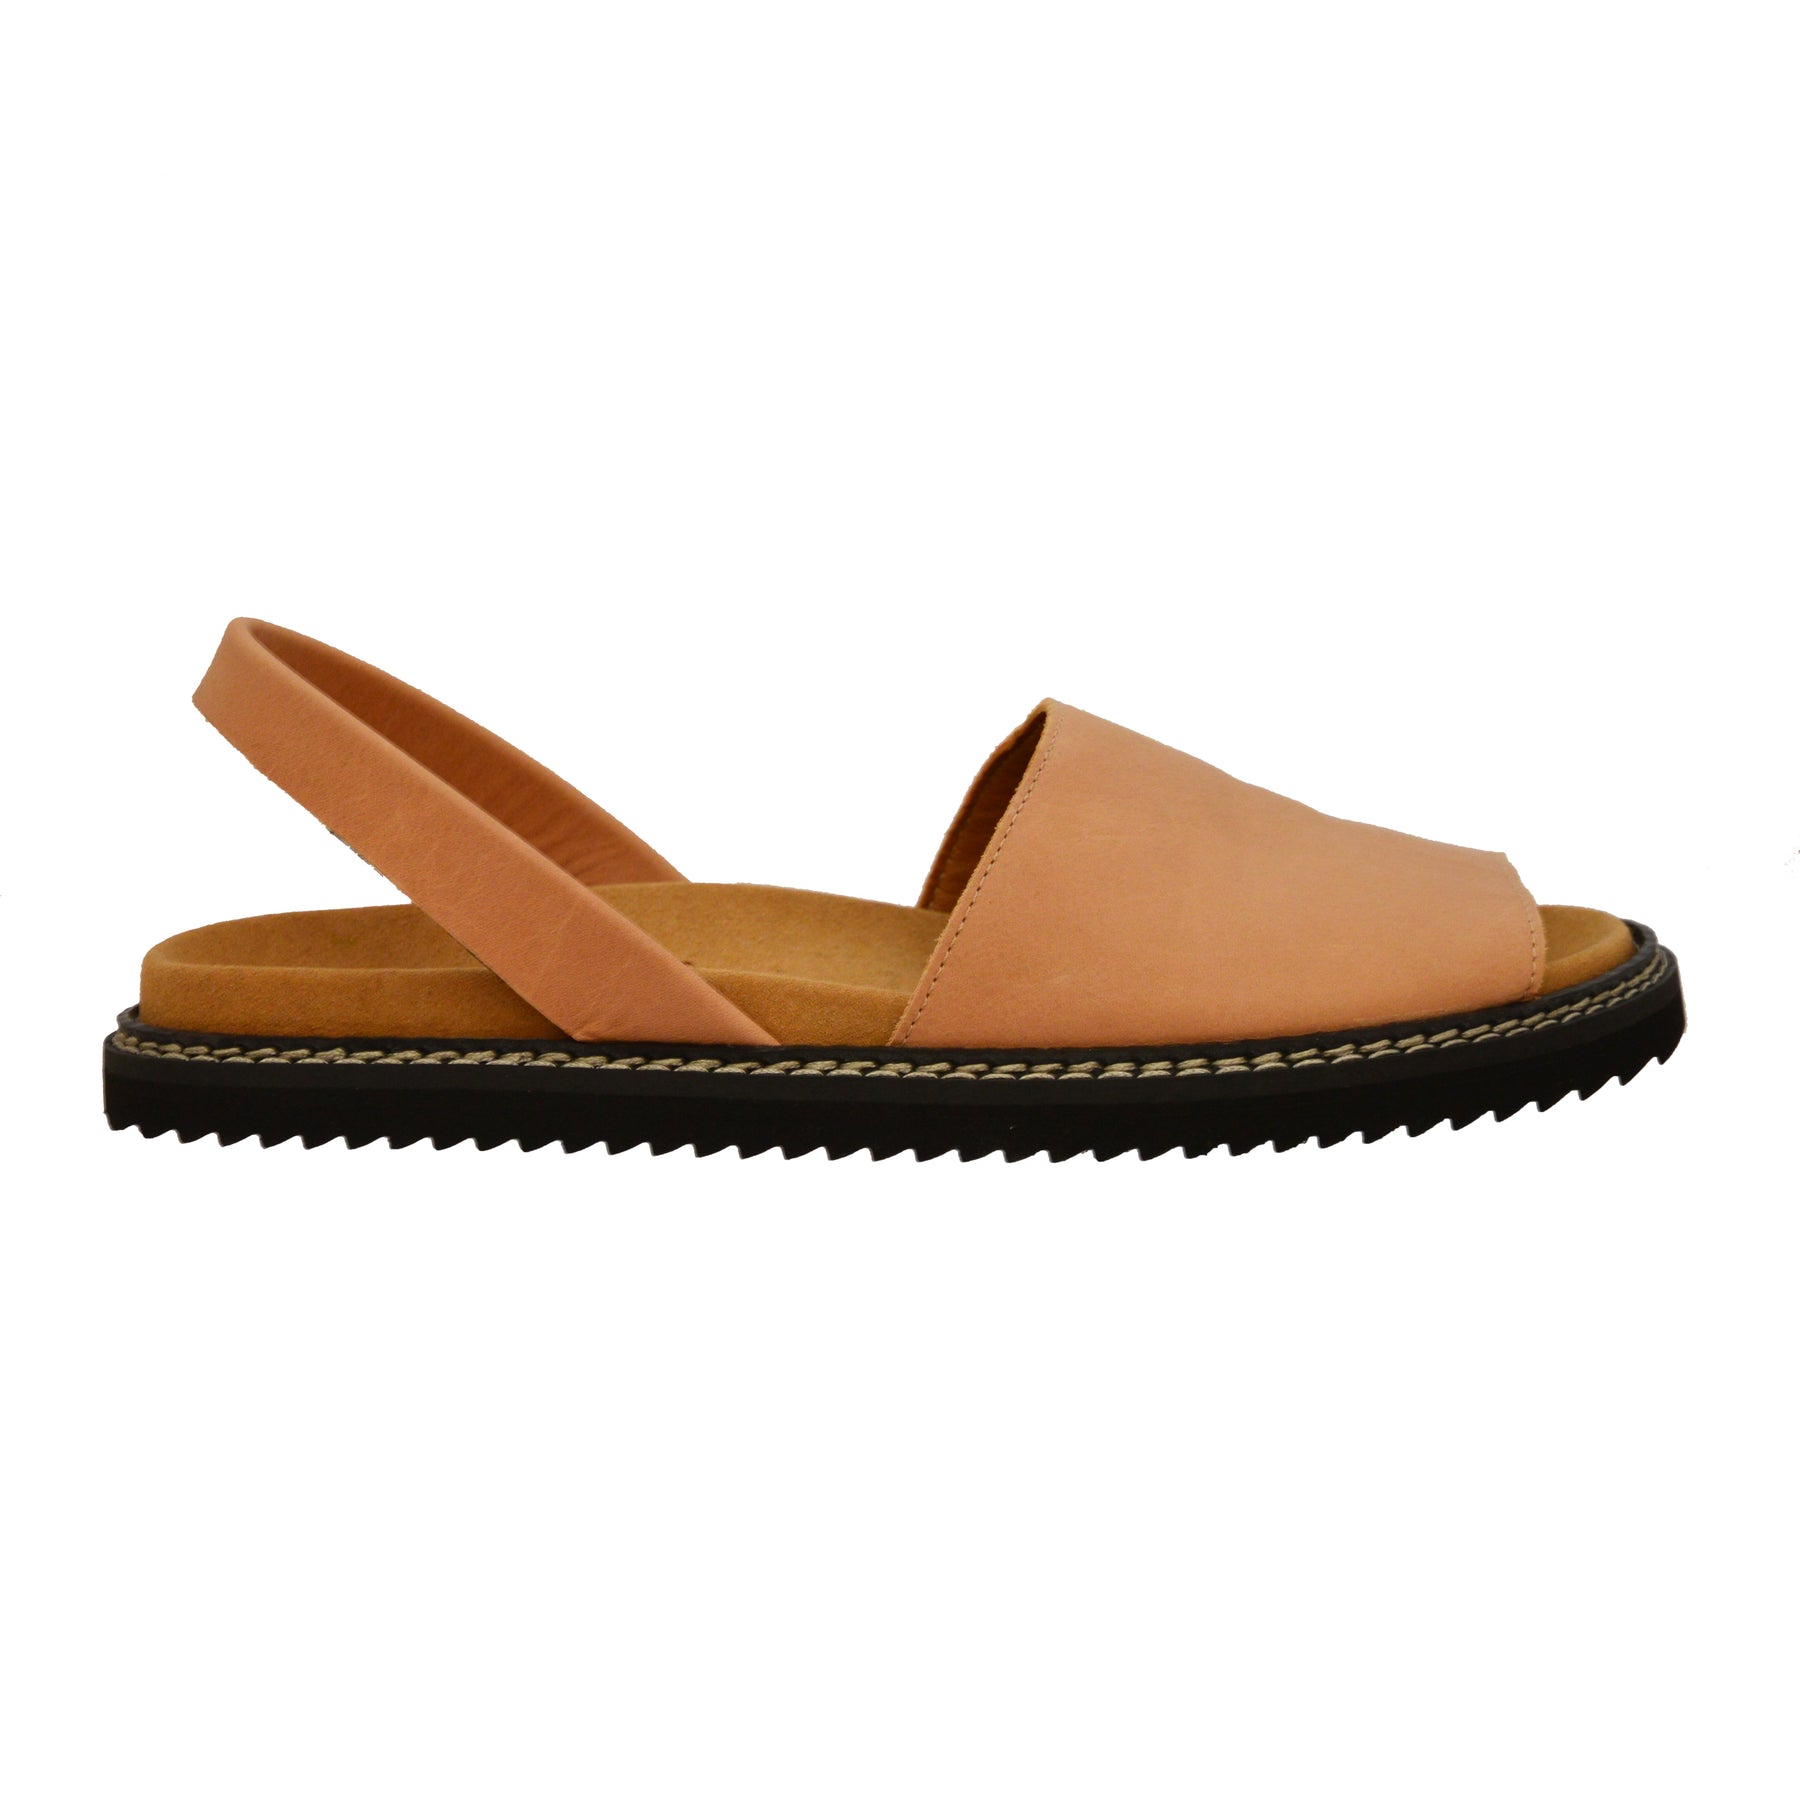 tan leather avarcas menorcan sandals with arch support flat sandals